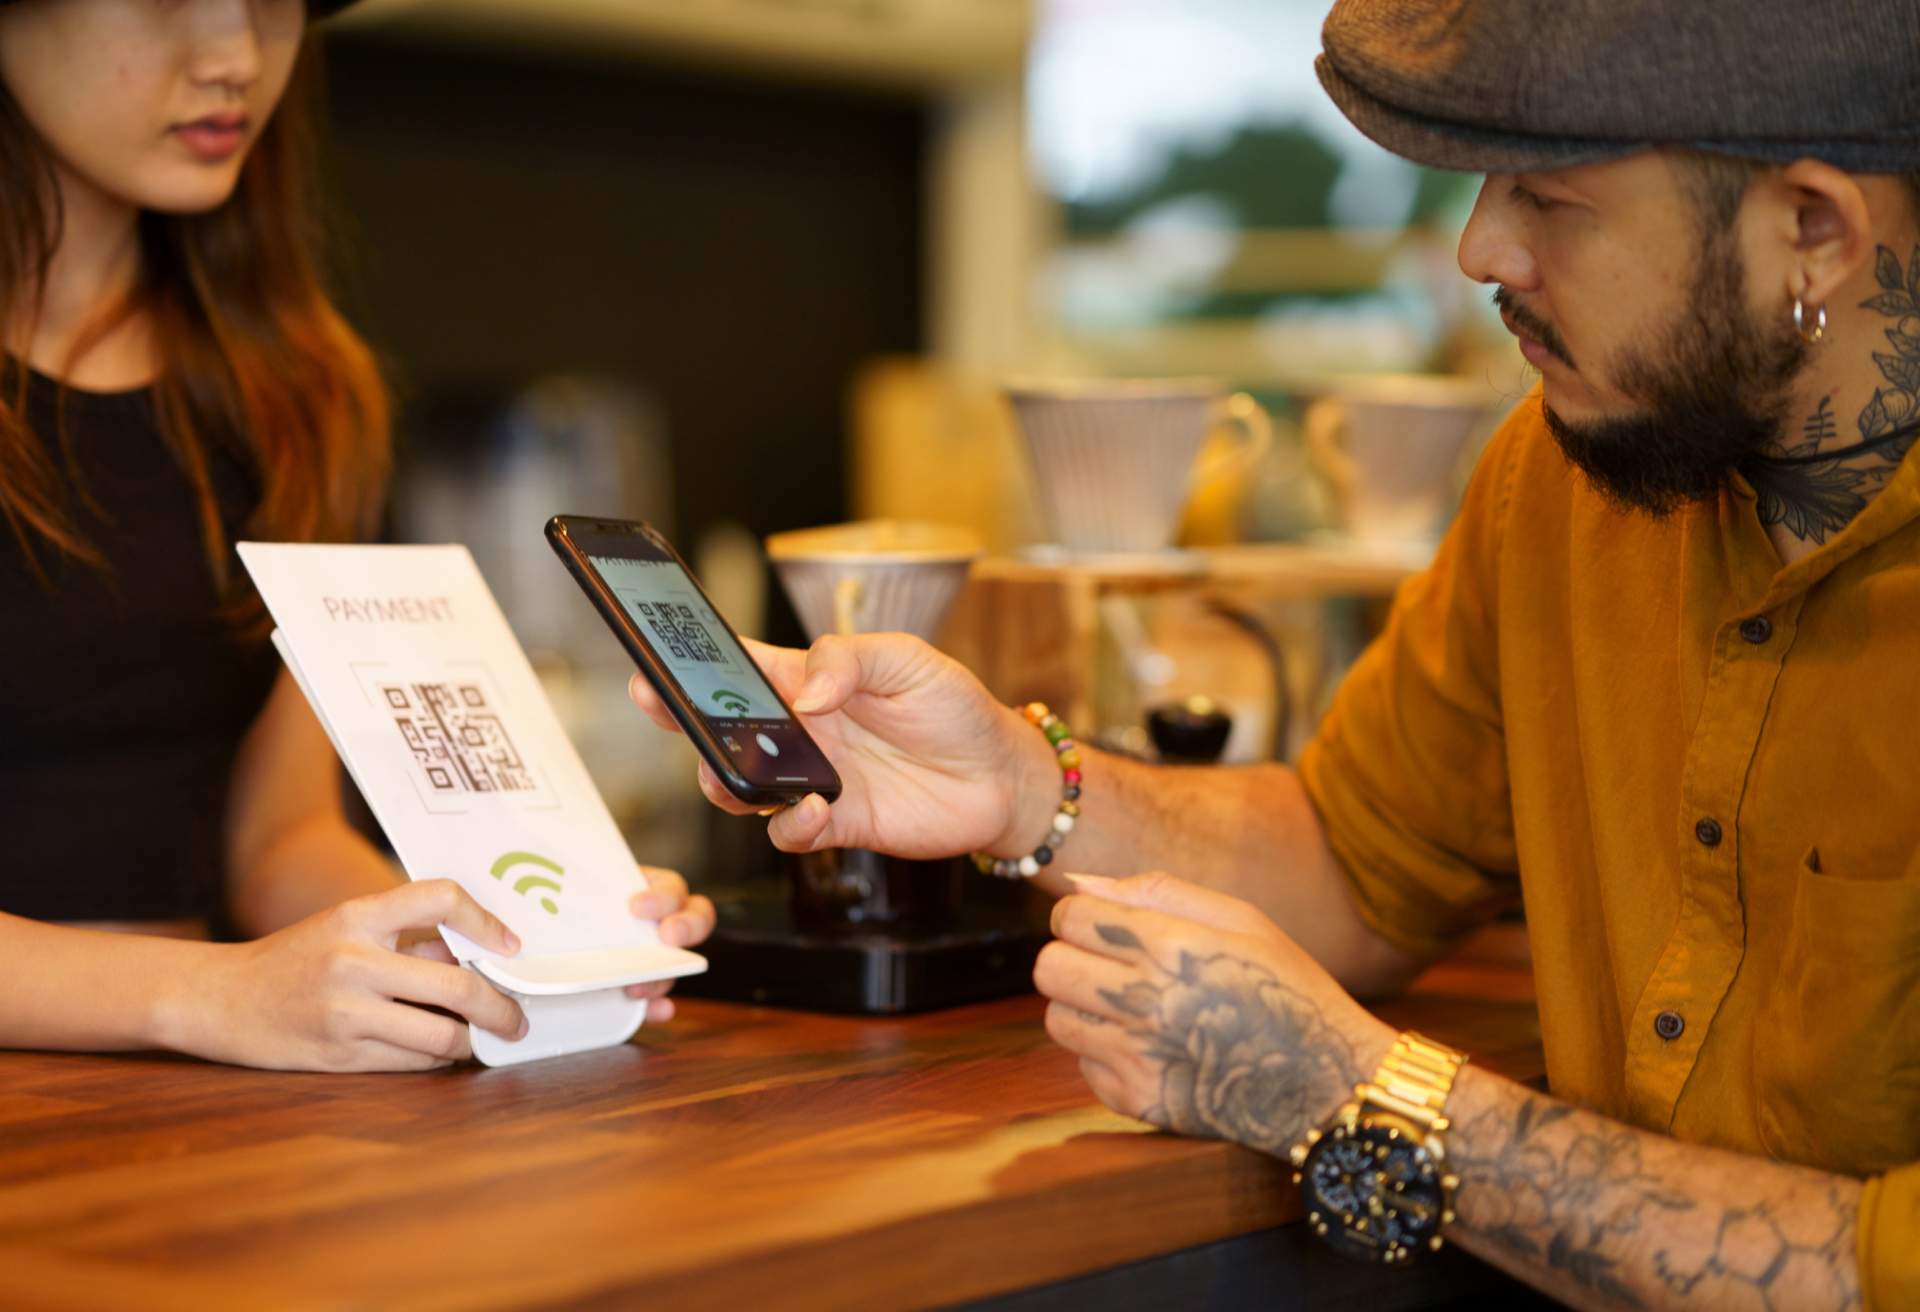 Image depicts two people at a counter. The host is holding up a QR code payment sign and the person who looks to be a customer is scanning the code with a mobile phone.